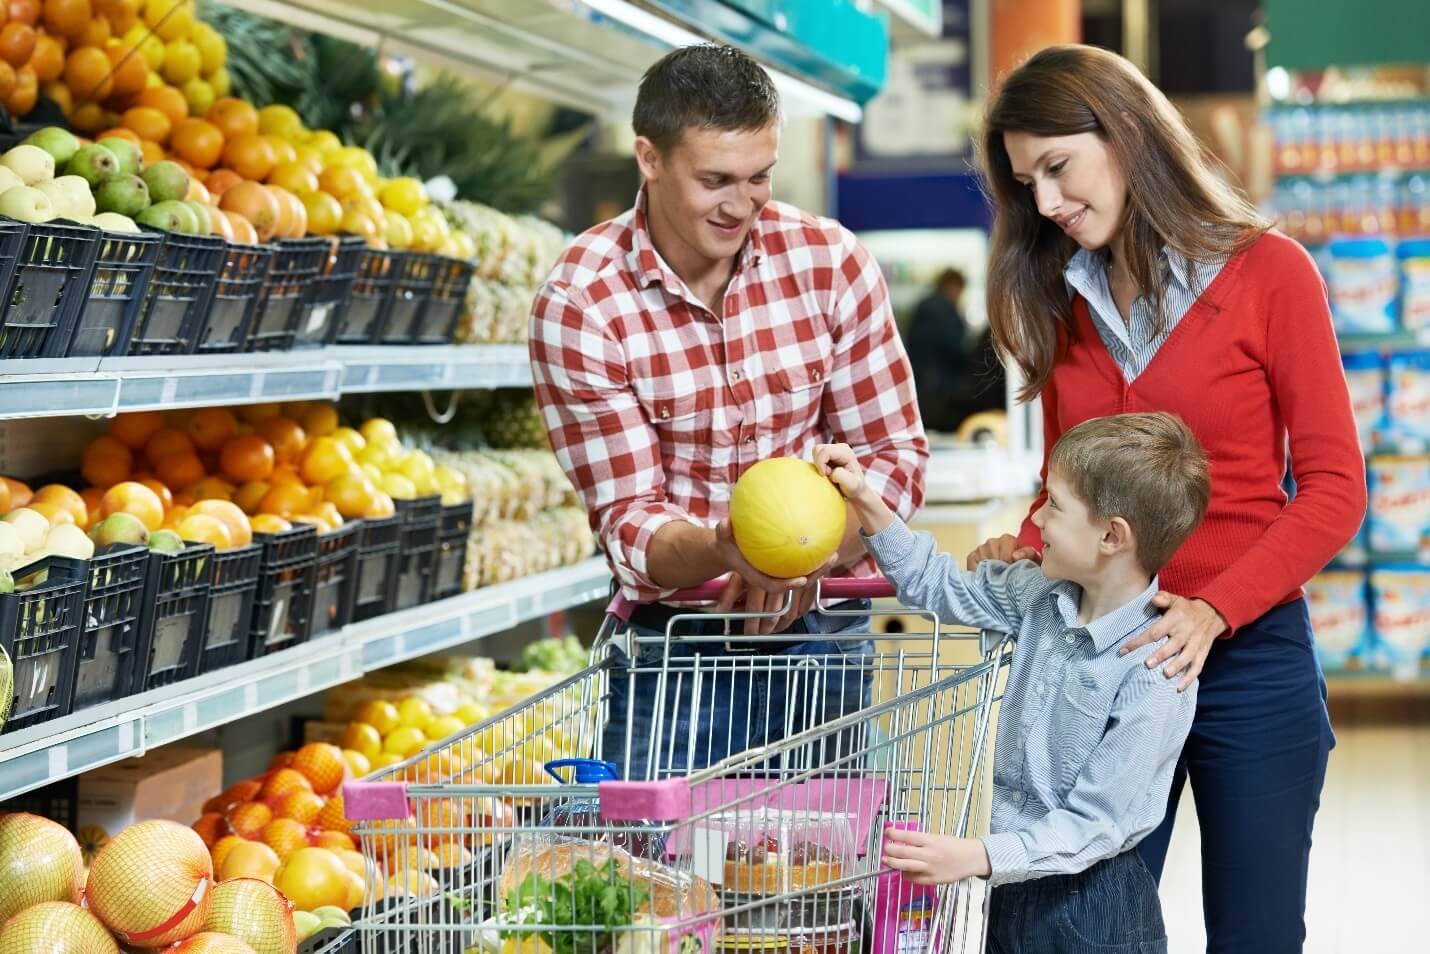 8 tips to Smart Grocery Shopping while on a Budget